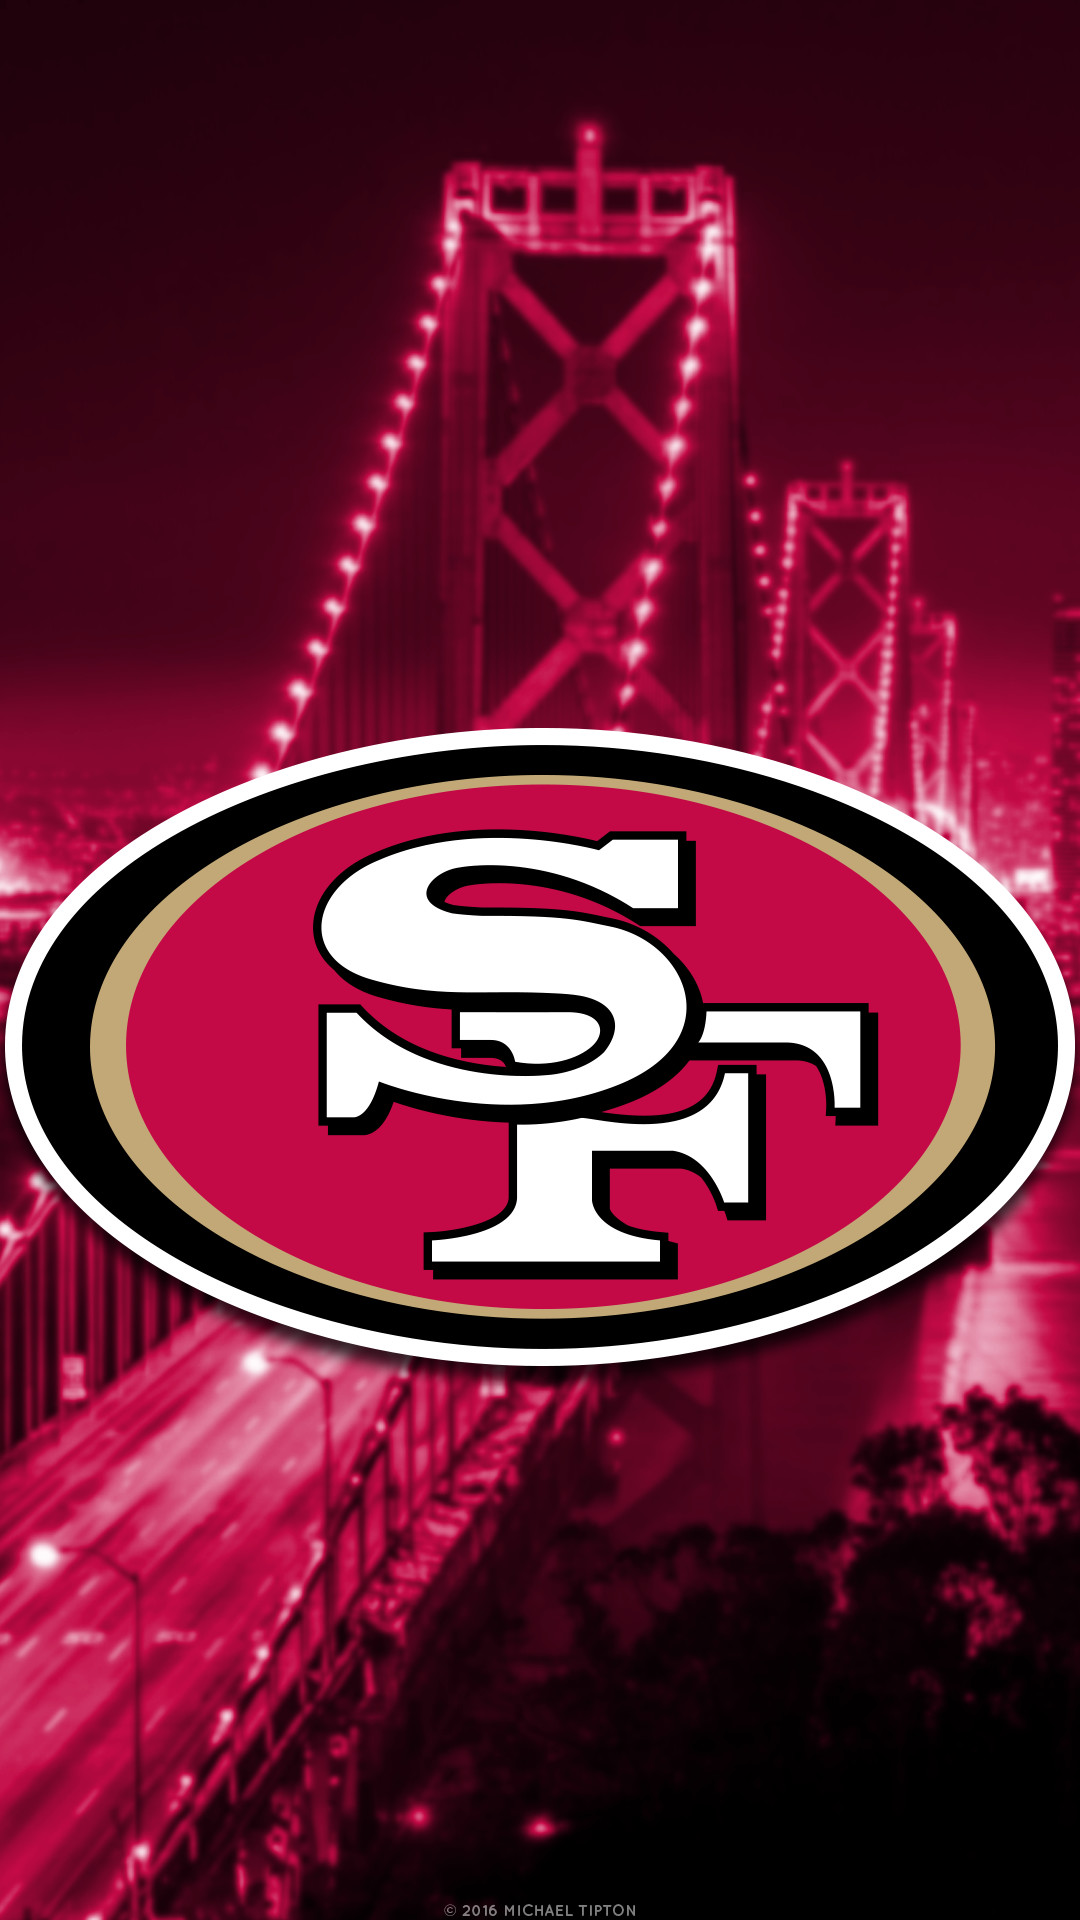 1080x1920 San Francisco 49ers 2018 schedule city logo wallpaper free for desktop pc  iphone galaxy and andriod